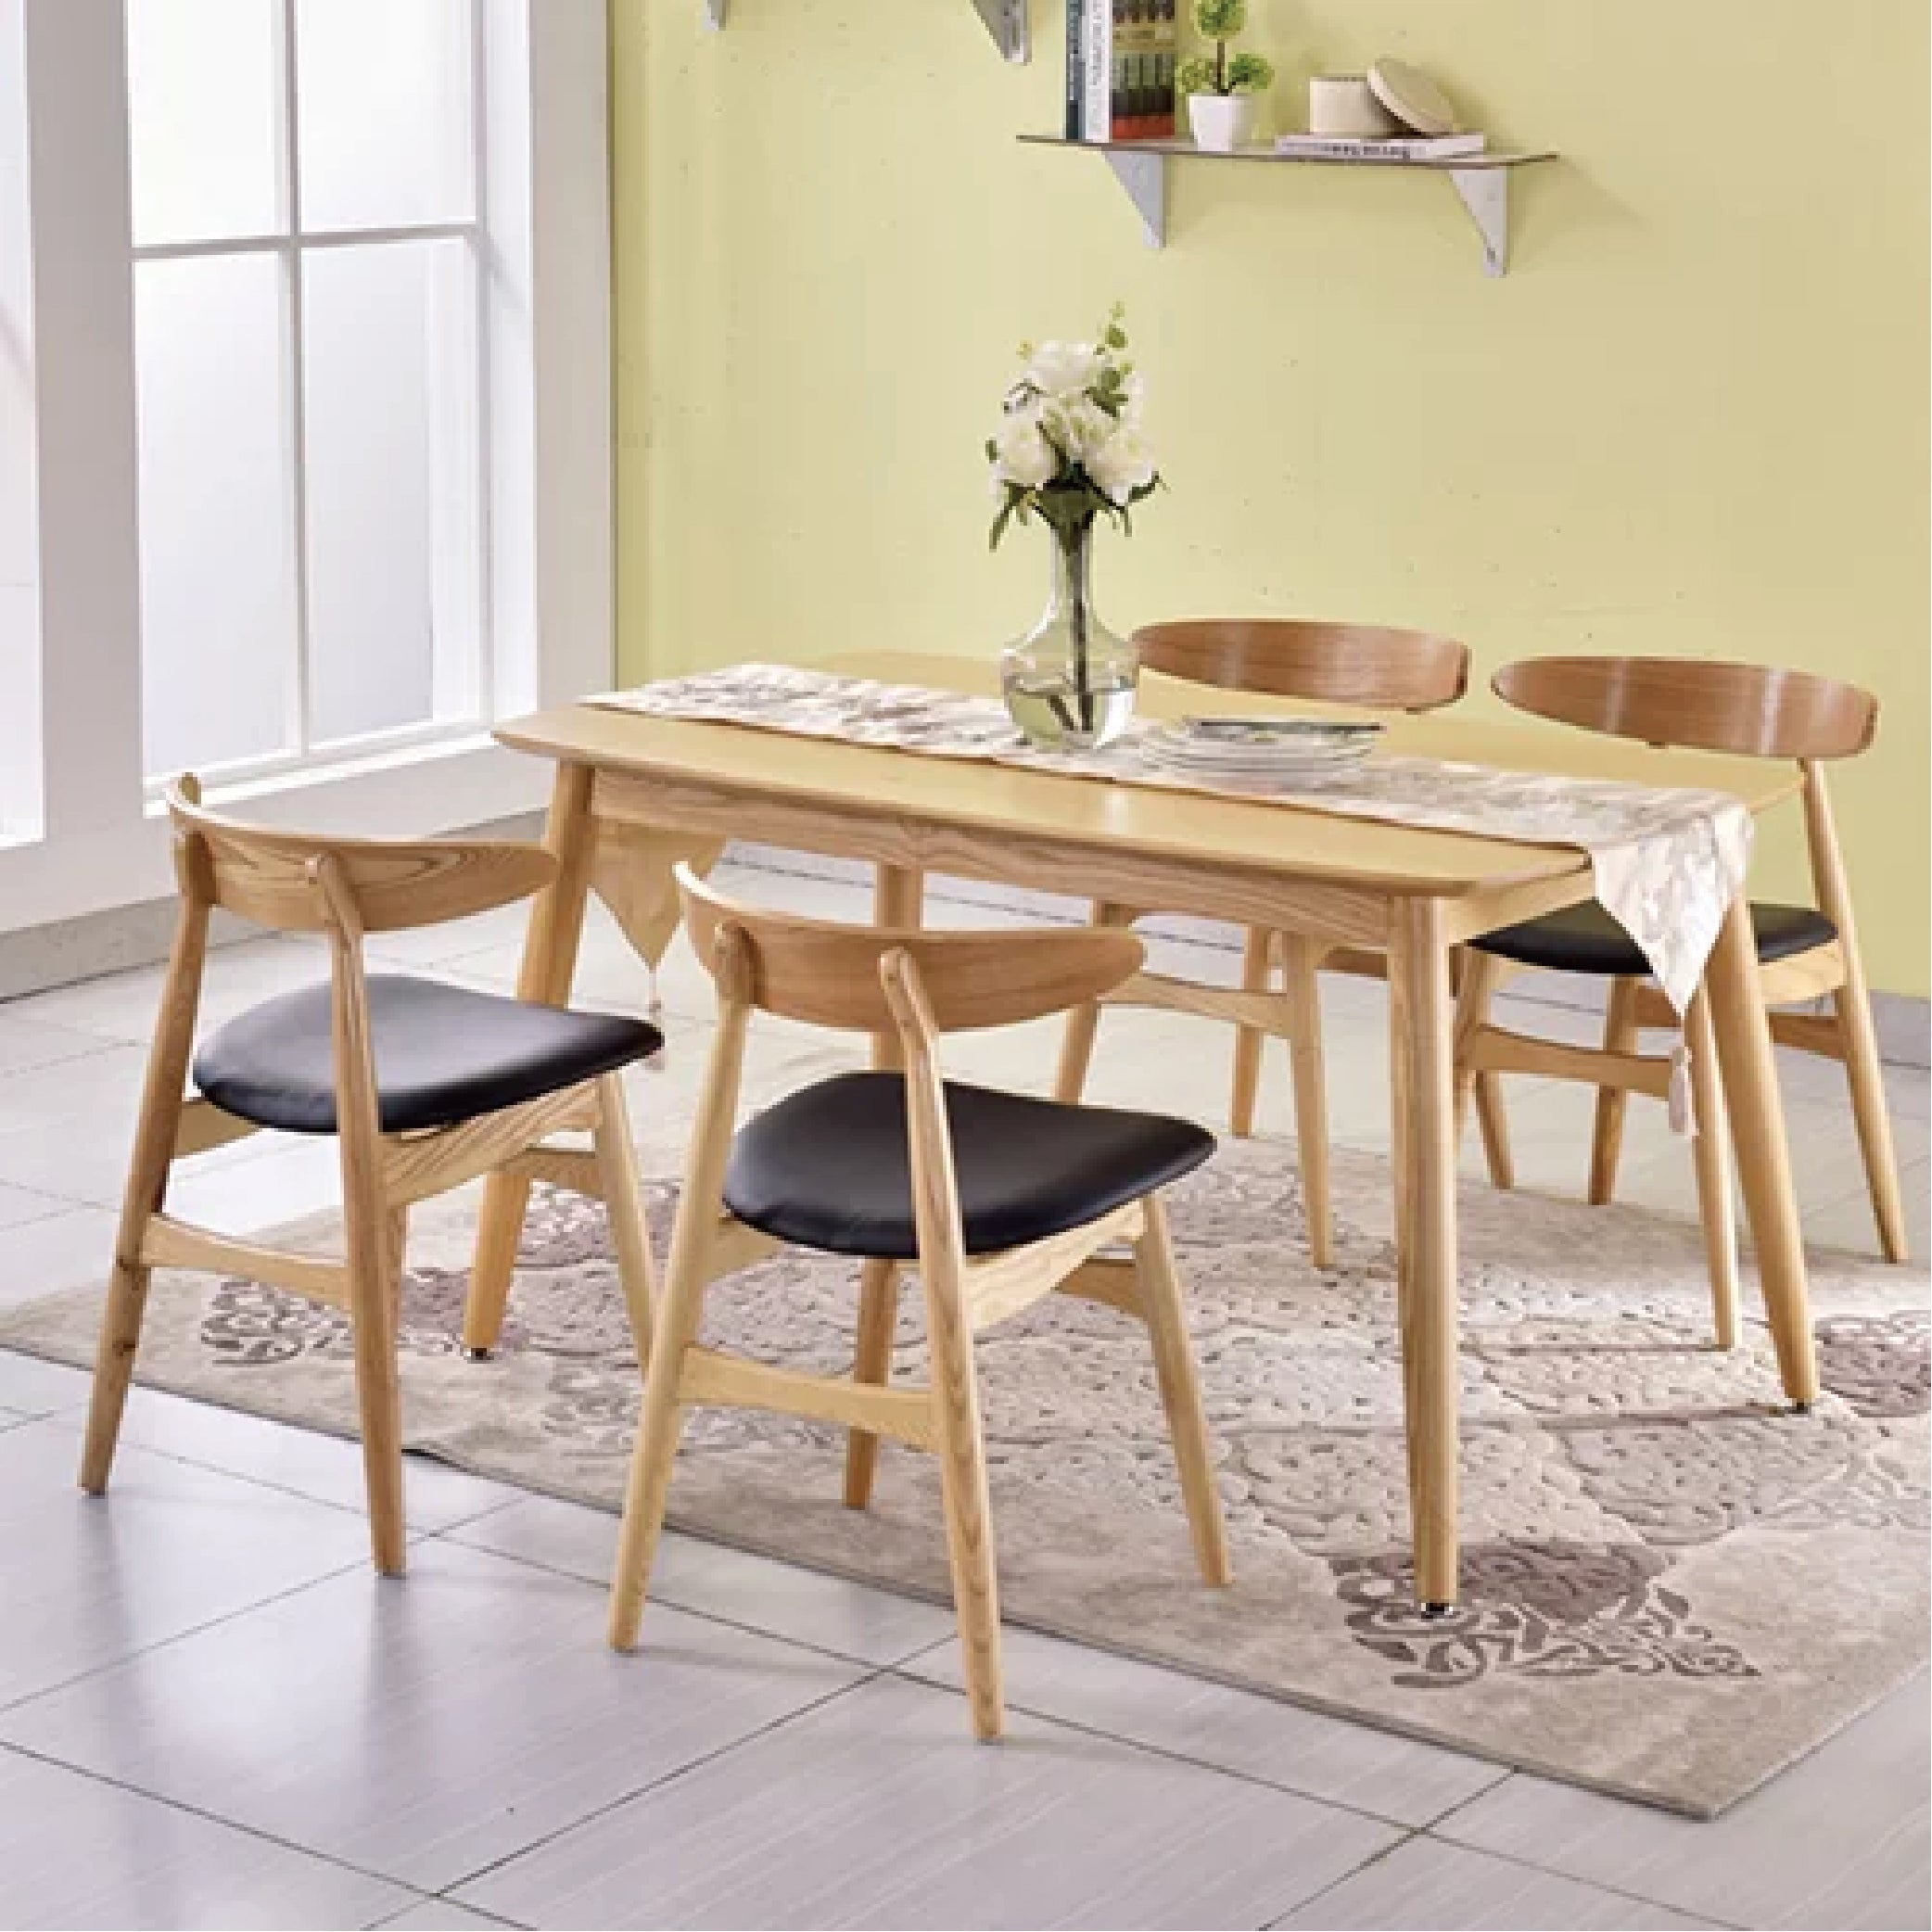 Hansa solid wood dining chairs (set of two)